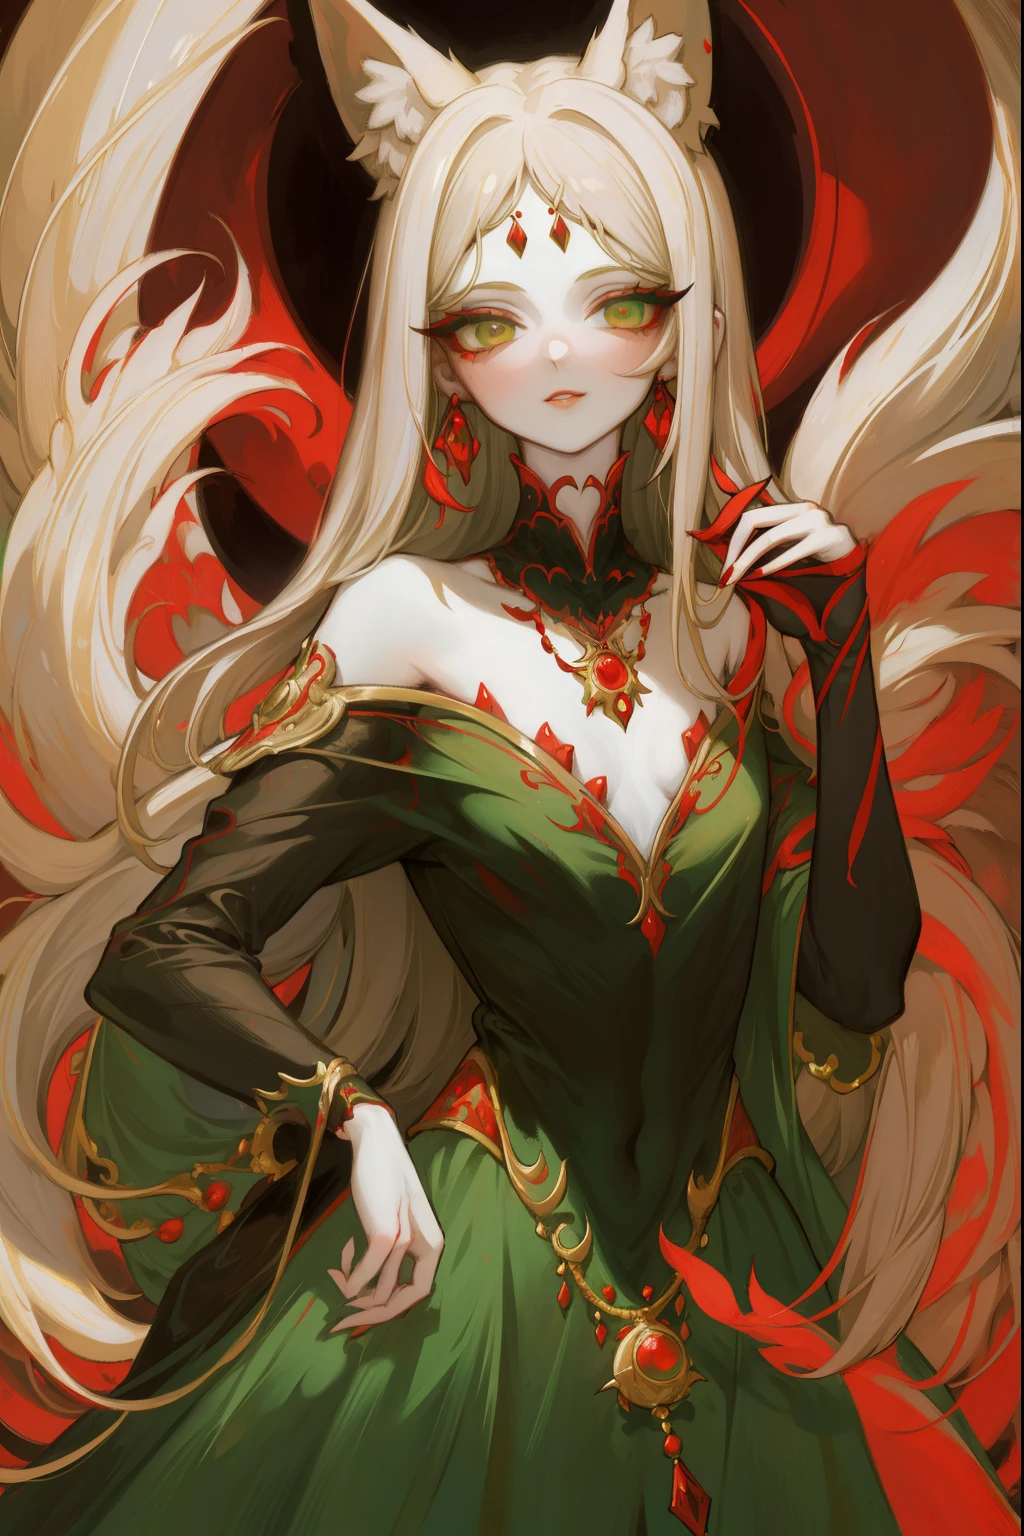 Upper body standing painting, sweetheart, solo, pale-skinned, (Fox ears), Elaborate Eyes, detail in face, Green-eyed, Red Eyeshadow, lips in red, black magic dress, awas, pervert smirk, tmasterpiece, high high quality, minimum, Tiny,